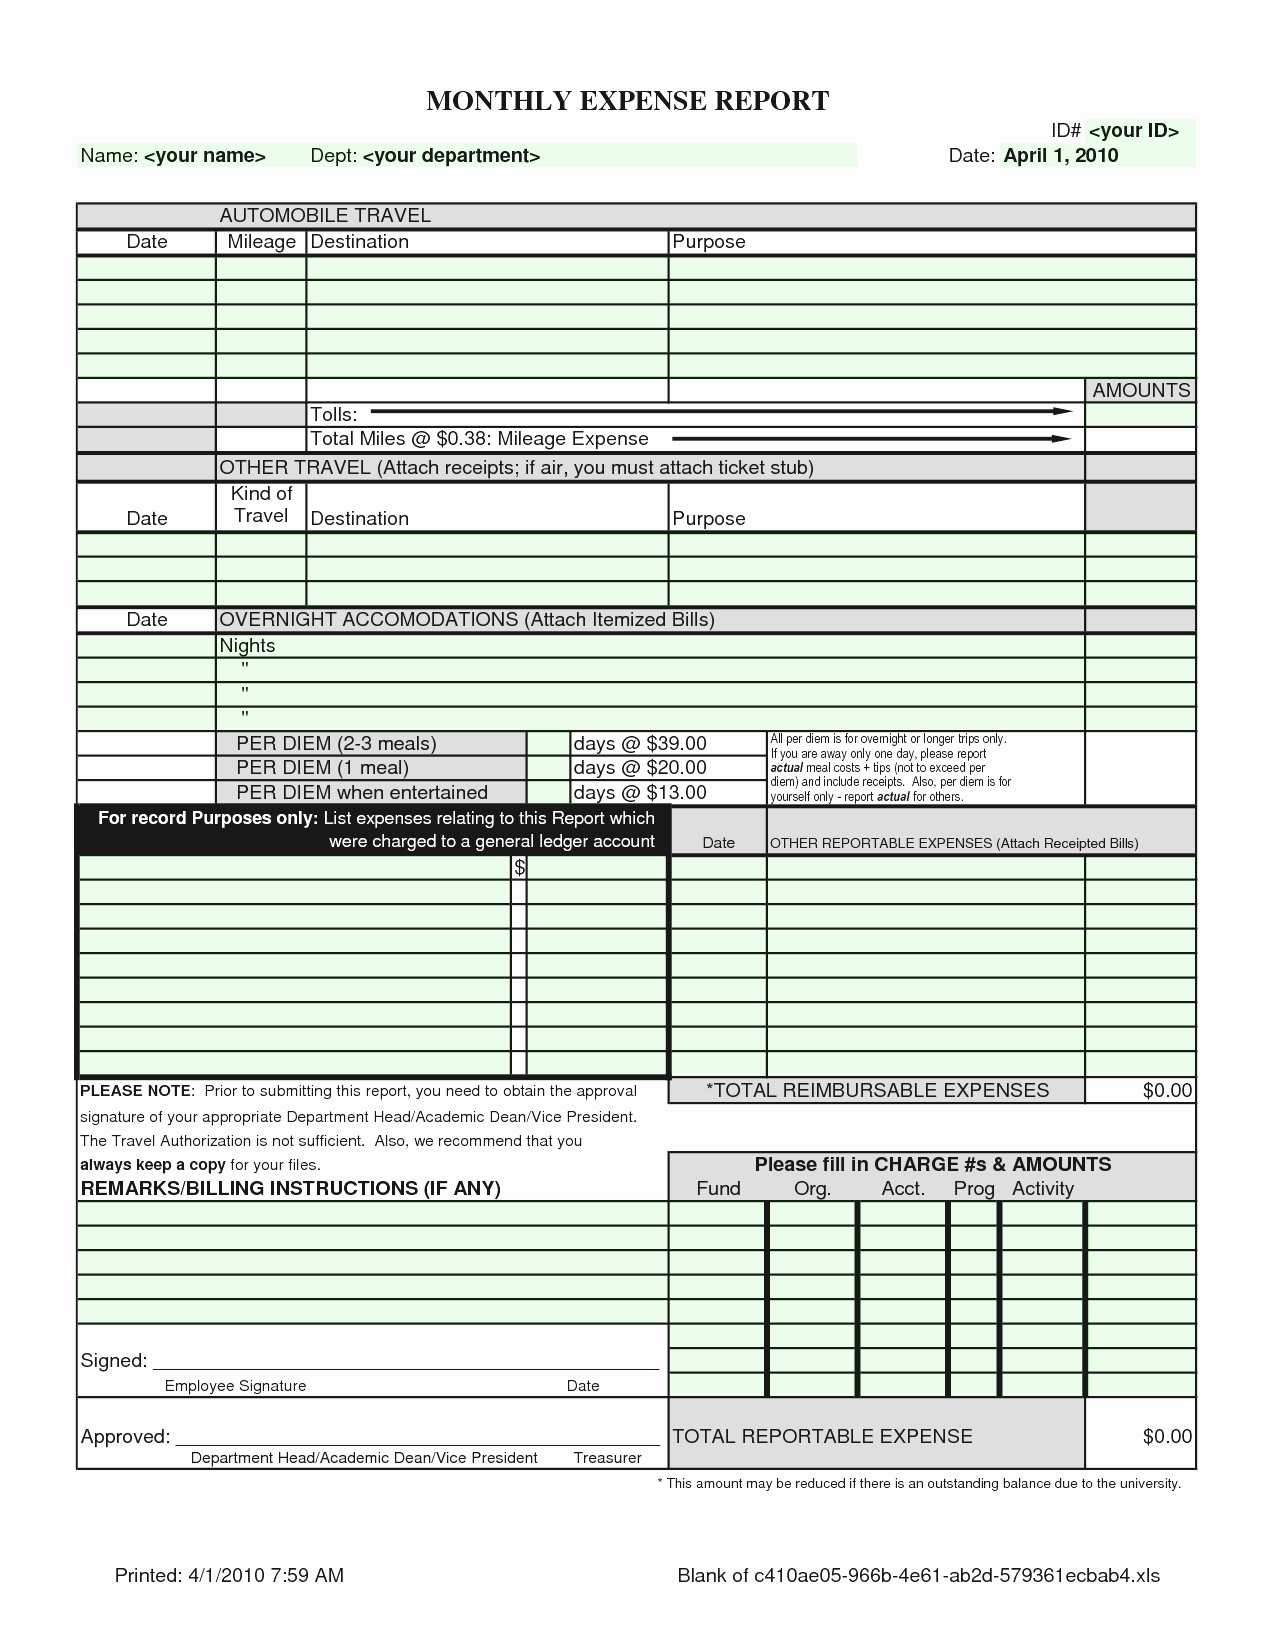 Business Expense Report Template Fresh Blank Expense Report Mughals